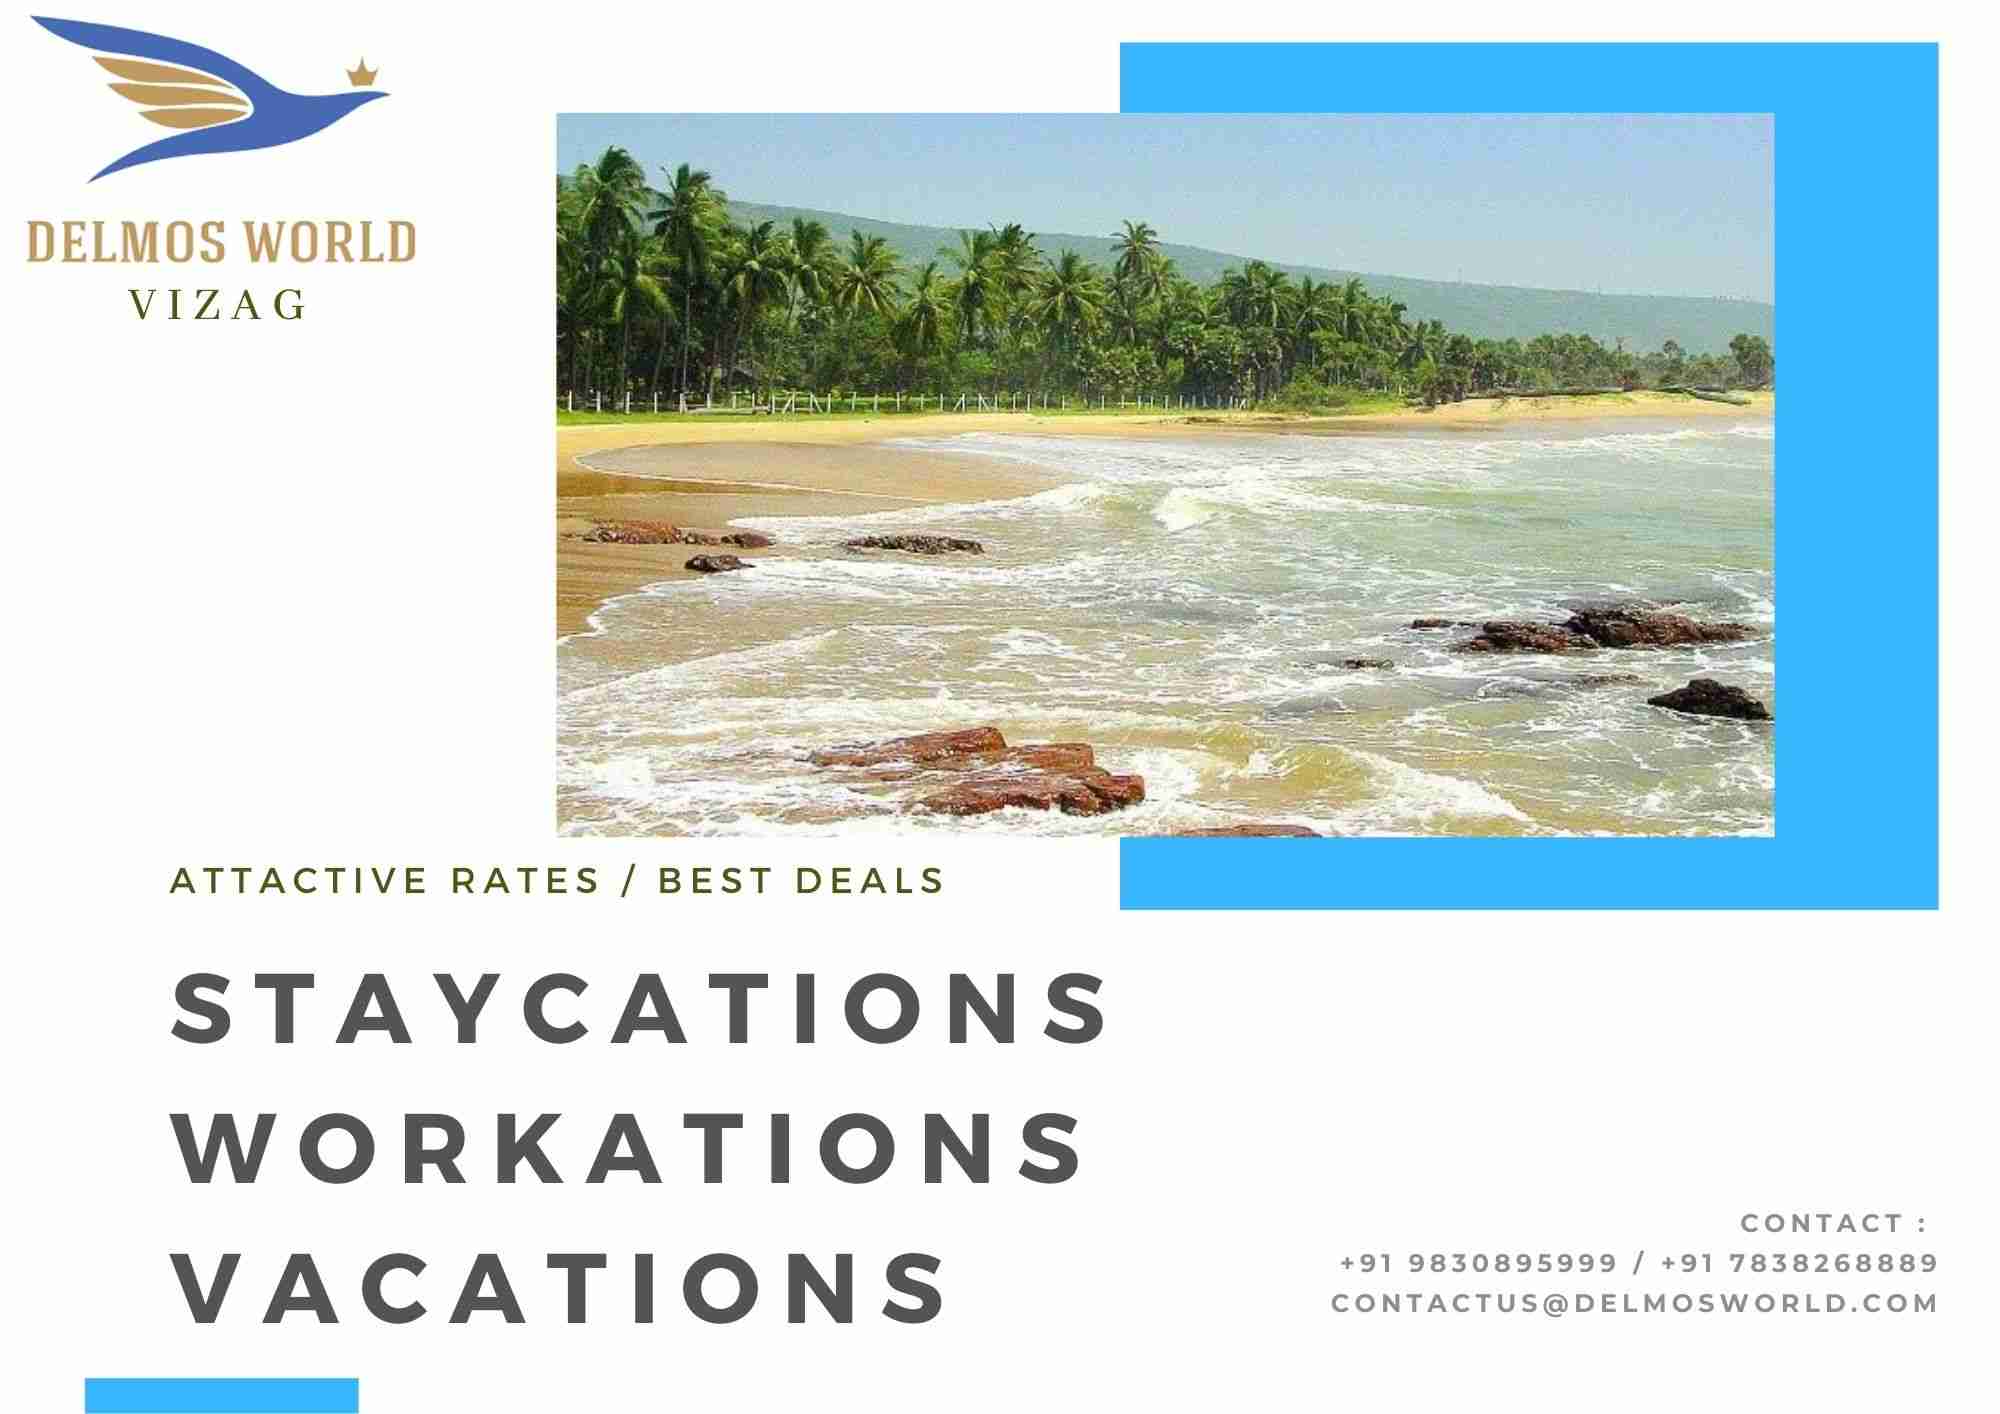 Staycation - Workations - Vacations